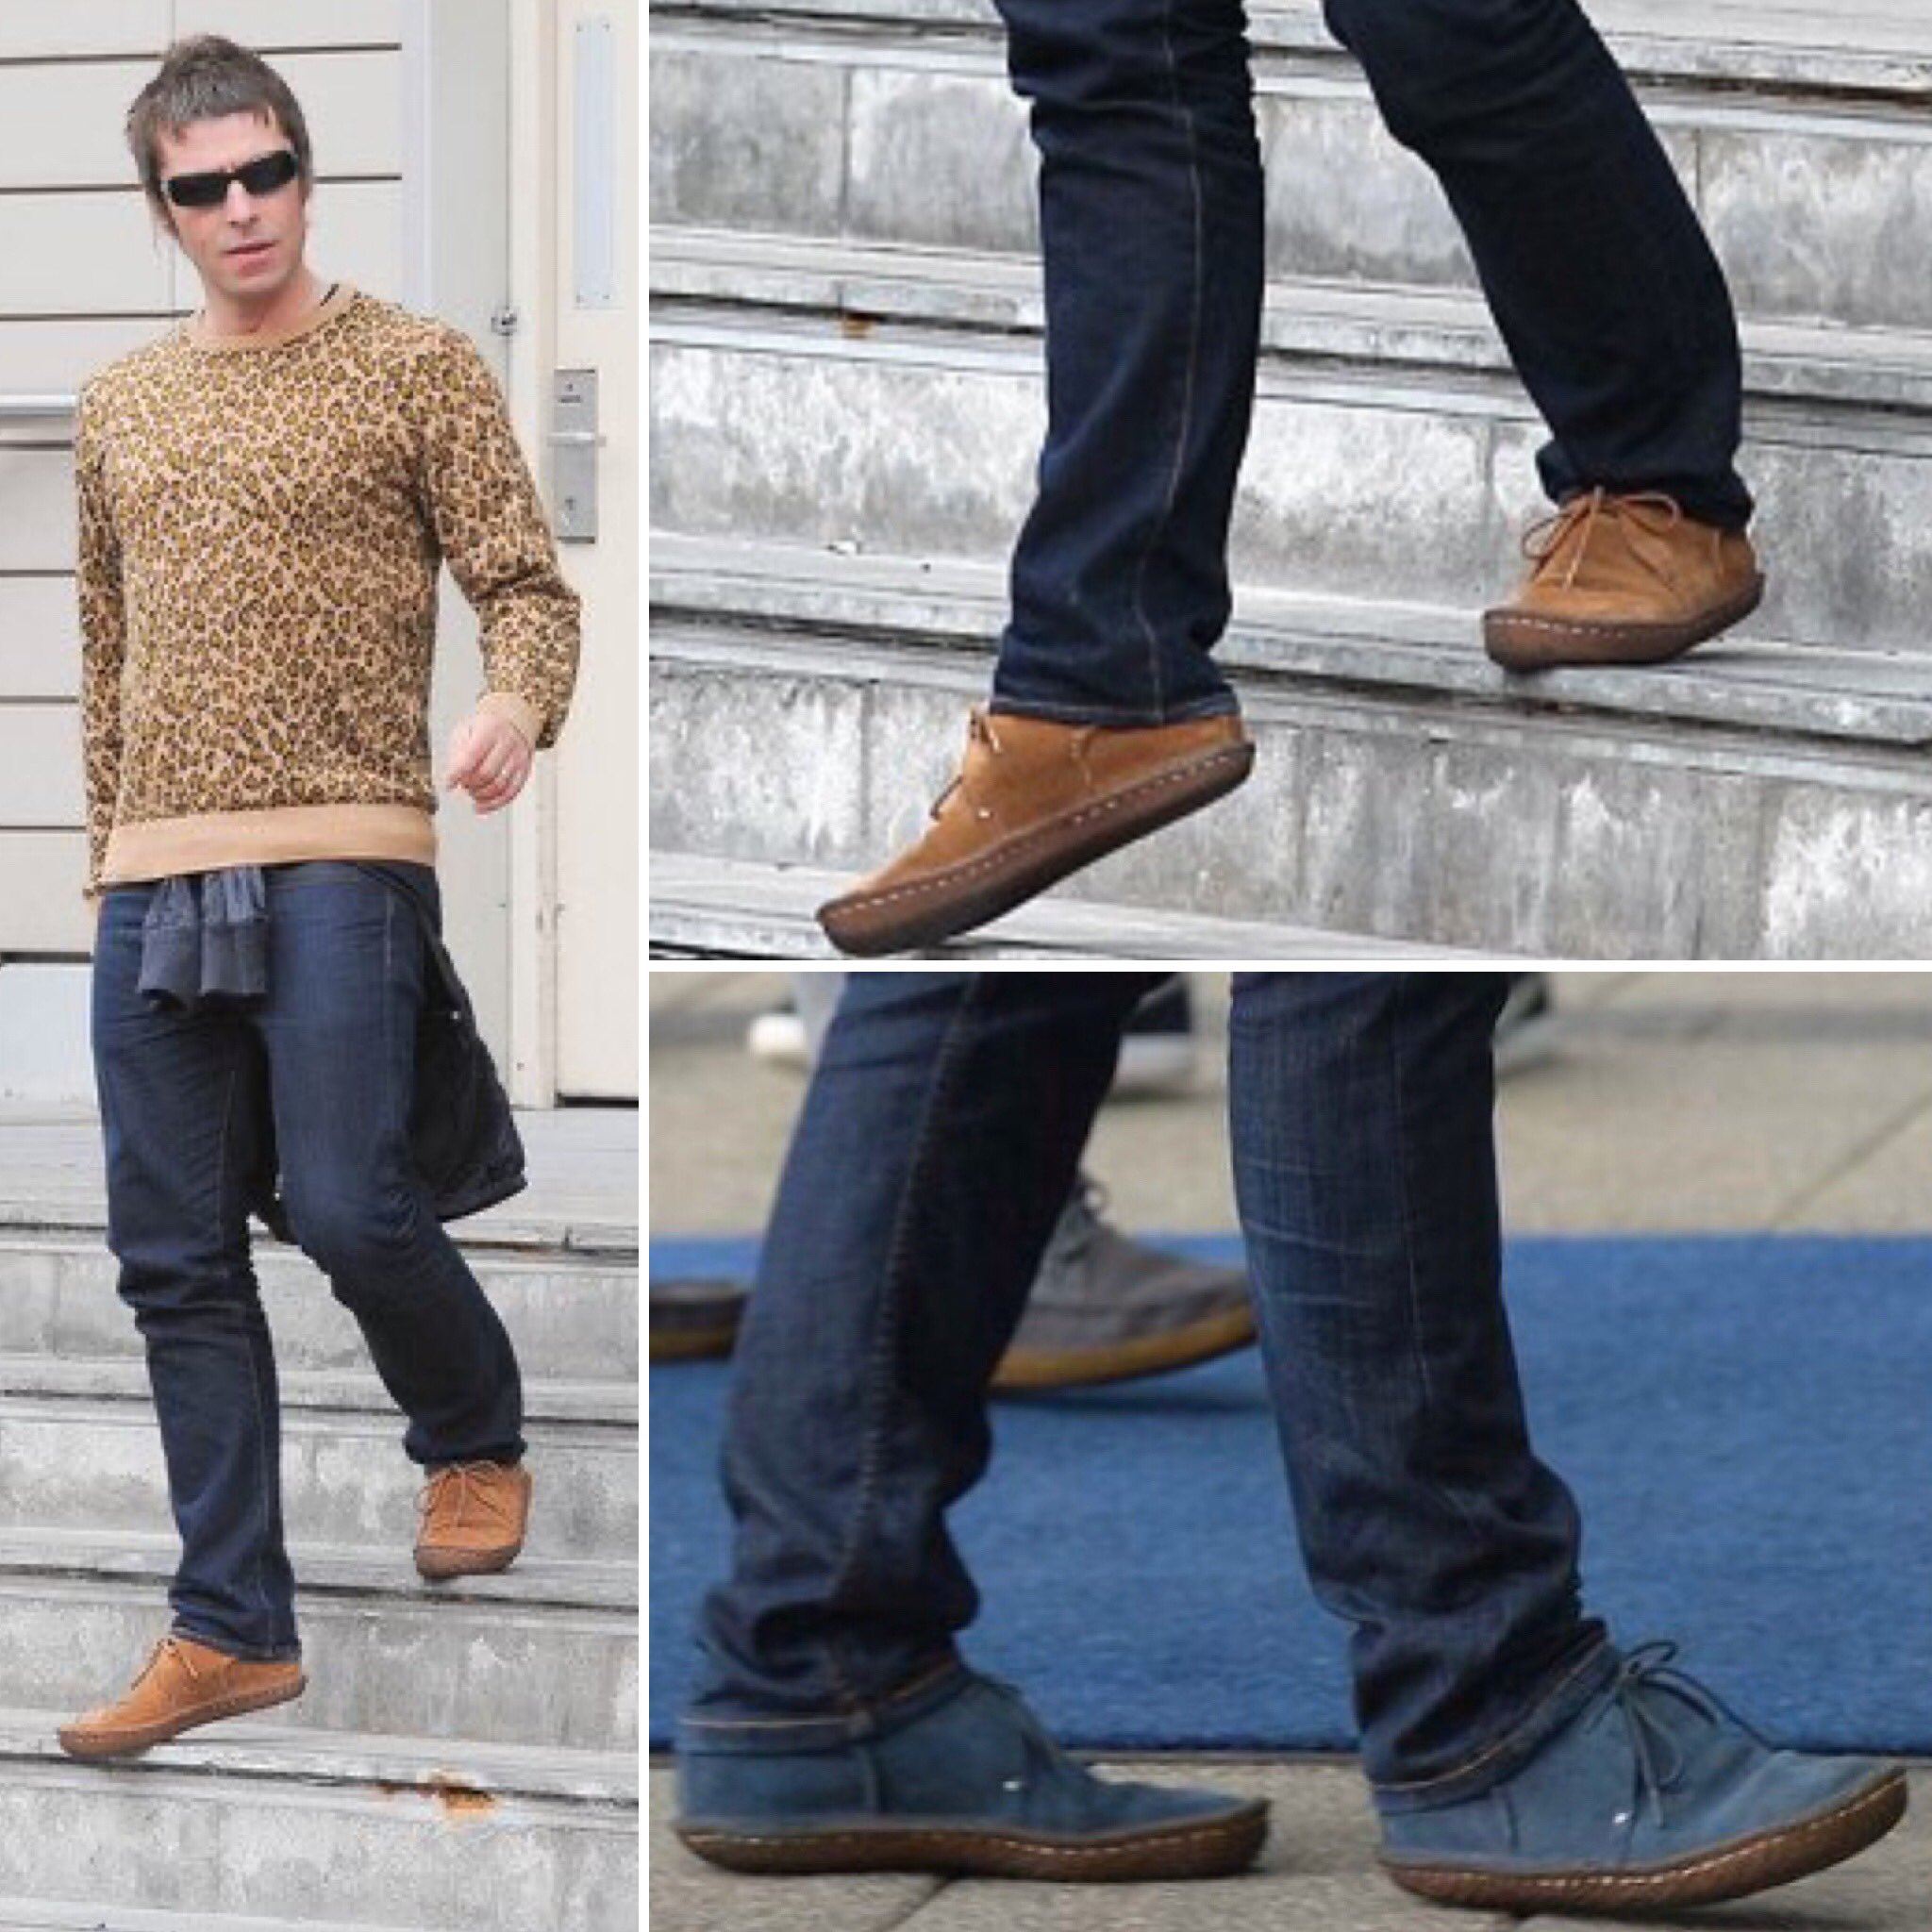 Liam Gallagher Wears on Twitter: "Liam Wears is spearheading a campaign for @clarksshoes to bring back the fabled #clarksoriginals Desert Rain. What do you think? /